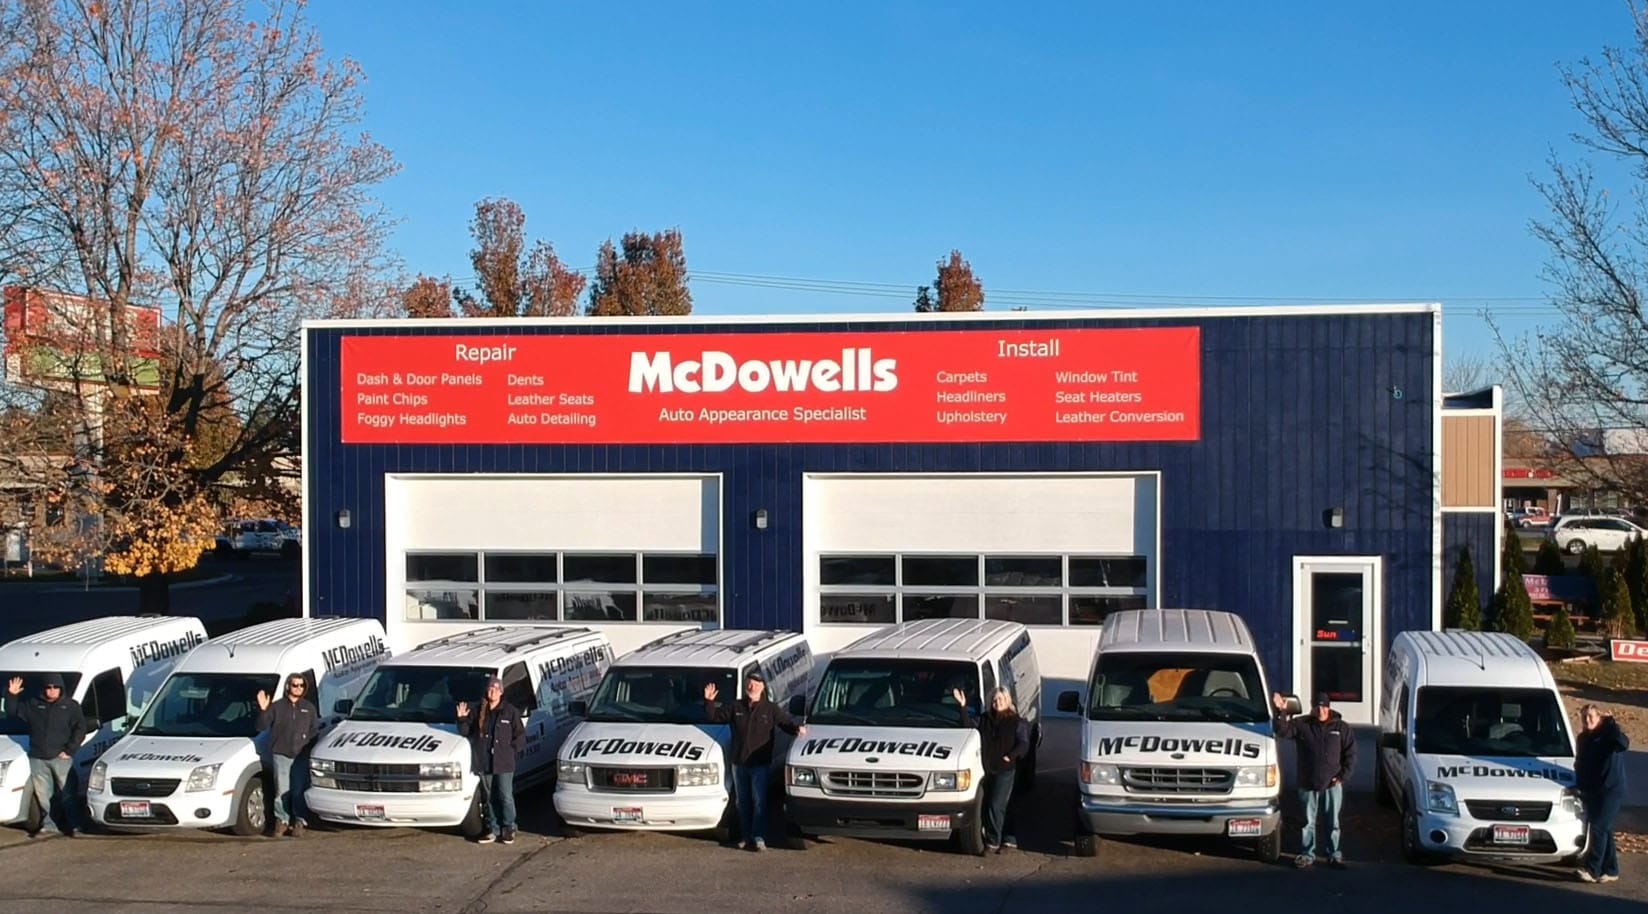 There is a faraway shot of the McDowells building with multiple vans parked in the front. 